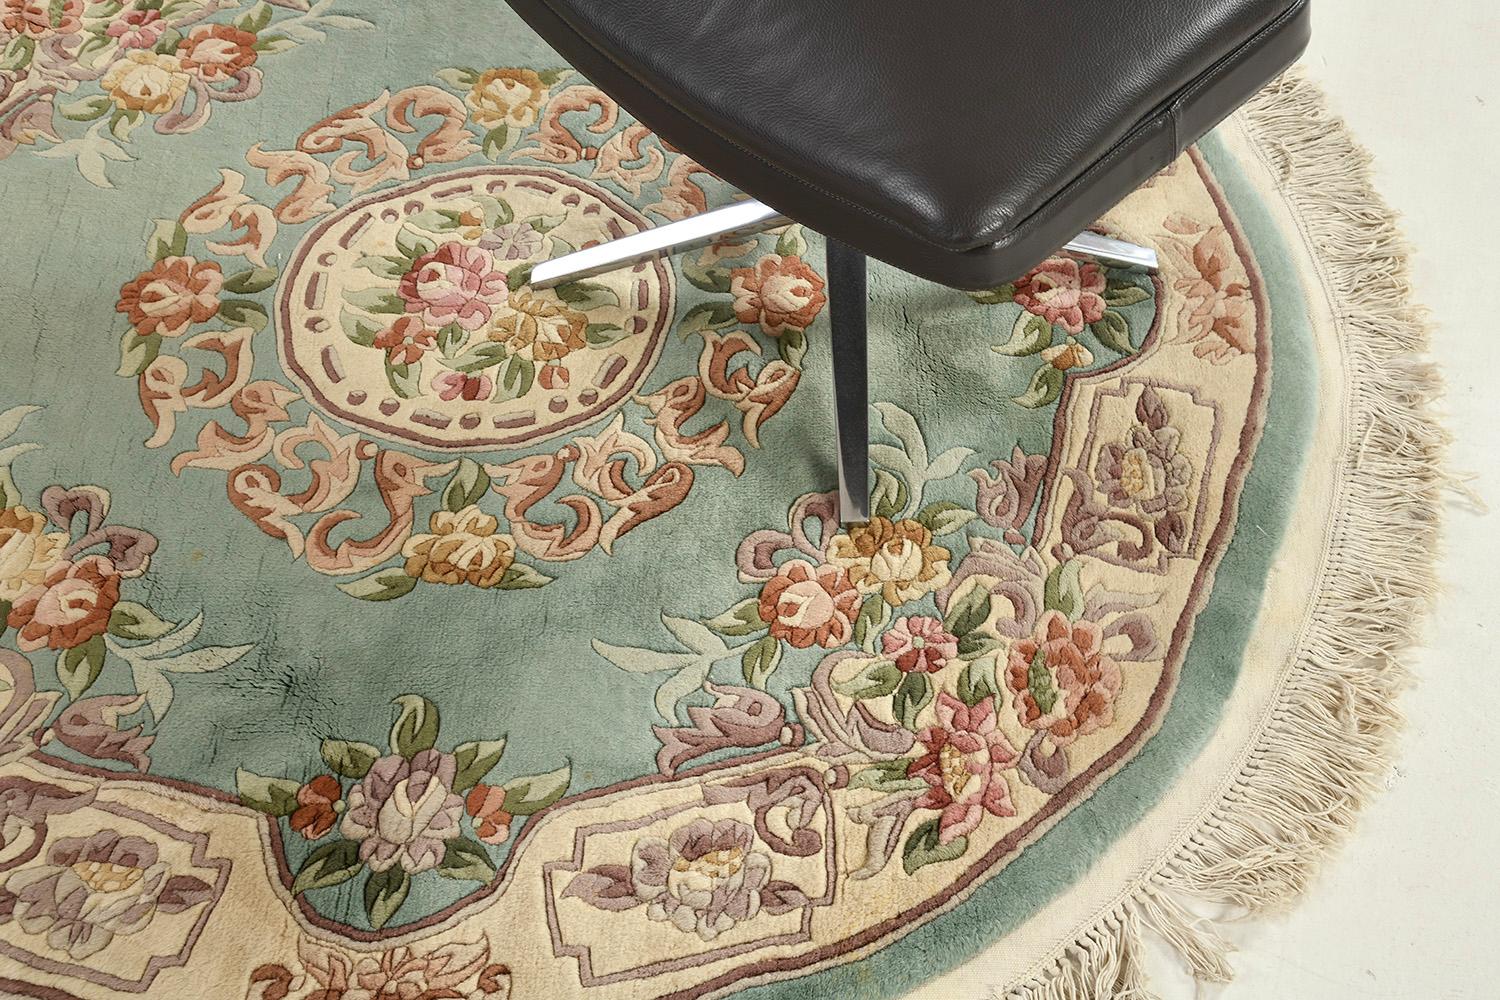 Peking is a revival of Chinese decorative Rug that will leave lasting impressions and elevate any design space. The bold elegant calming field and full bloom borders together with the traditional floral vines work together to create a vibrant and